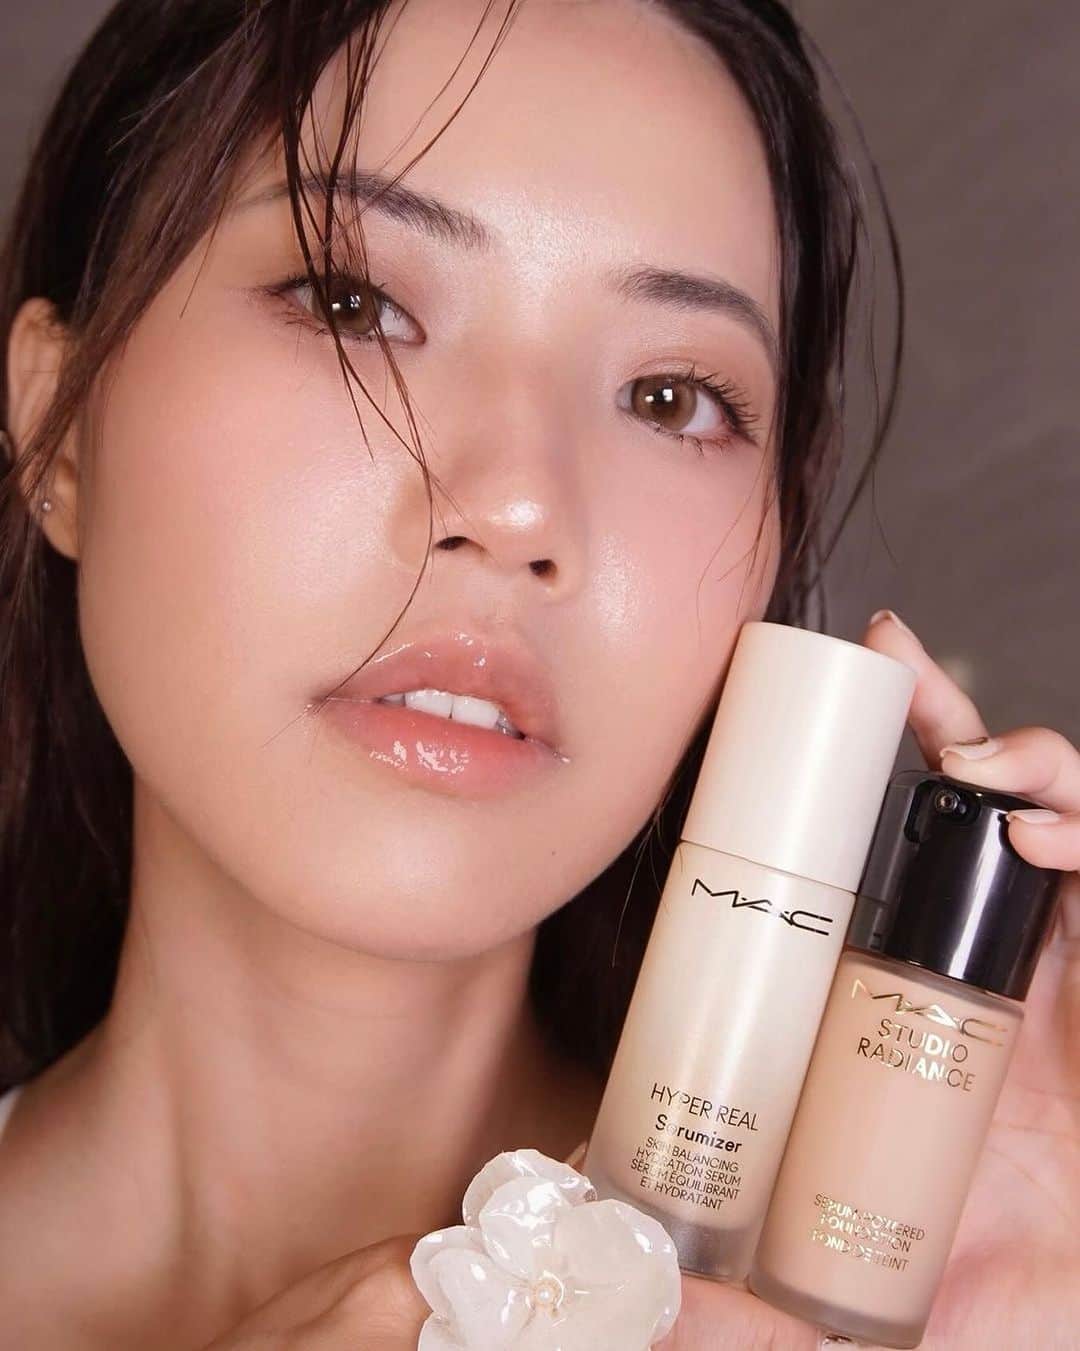 M·A·C Cosmetics Hong Kongさんのインスタグラム写真 - (M·A·C Cosmetics Hong KongInstagram)「皮膚又乾又暗無神采？ 立即學@sying.yau 嘅冬日養膚底妝三文治法💫  ✔️#貼妝保鮮水 - 瞬間補水喚醒疲憊肌💦 ✔️#貼妝花瓣精華* - 重塑兼平滑膚質，由肌底開始建立水庫 ✔️#養膚美顏底霜 - 提亮、去黃、補水同步養顏 ✔️#追光粉底 - 注入33大養膚成分，塑出原生光感肌  層層注水，膚質自然水嫩彈滑有光澤✨  🤍 94% 用家表示產品有助提升肌膚狀況及外觀* （*對122位亞洲顧客，早晚使用四星期後進行測試）  Product featured: Hyper Real Skin Balancing Hydrating Serum 清透煥顏修護精華 - HK495/30ml, HK$320/15ml Prep + Prime Fix+ 妝前瞬間定妝噴霧 - HK$245 Studio Radiance Serum-powered Foundation 亮肌輕透精華粉底 - HK$410 LIGHTFUL C+ Coral Grass Tinted Primer C+光透養膚防曬底霜 - HK$390 #MACLightfulC #MAC專業訂製 #MAC實力底妝 #MAC貼身妝藝 #MACStudioRadiance  #MACHyperReal #MACSkinArtistry #MACHongKong #Regram from @sying.yau  Keep dull and dry skin in curb this winter!💫 Follow @sying.yau for her 4-step recipe:  ✔️Spray the Prep + Prime Fix+ on face to instantly fresh up your skin with moisture boost ✔️Retexturise and smooth your skin with Hyper Real Skin Balancing Hydrating Serum*  ✔️Brighten, tint and hydrate your skin with LIGHTFUL C+ Coral Grass Tinted Primer in one-go ✔️Unleash your lit-from-within with Studio Radiance Serum-powered Foundation, thanks to its 33 skin-loving ingredients Time to saturate skin with a concentrated boost of hydration  by these high-performance products now💦  🤍94% said this product improved the appearance of skin texture after 4 weeks* (*Consumer testing on 122 Asian panelists after four weeks of use, twice a day.)」12月5日 19時41分 - maccosmeticshk